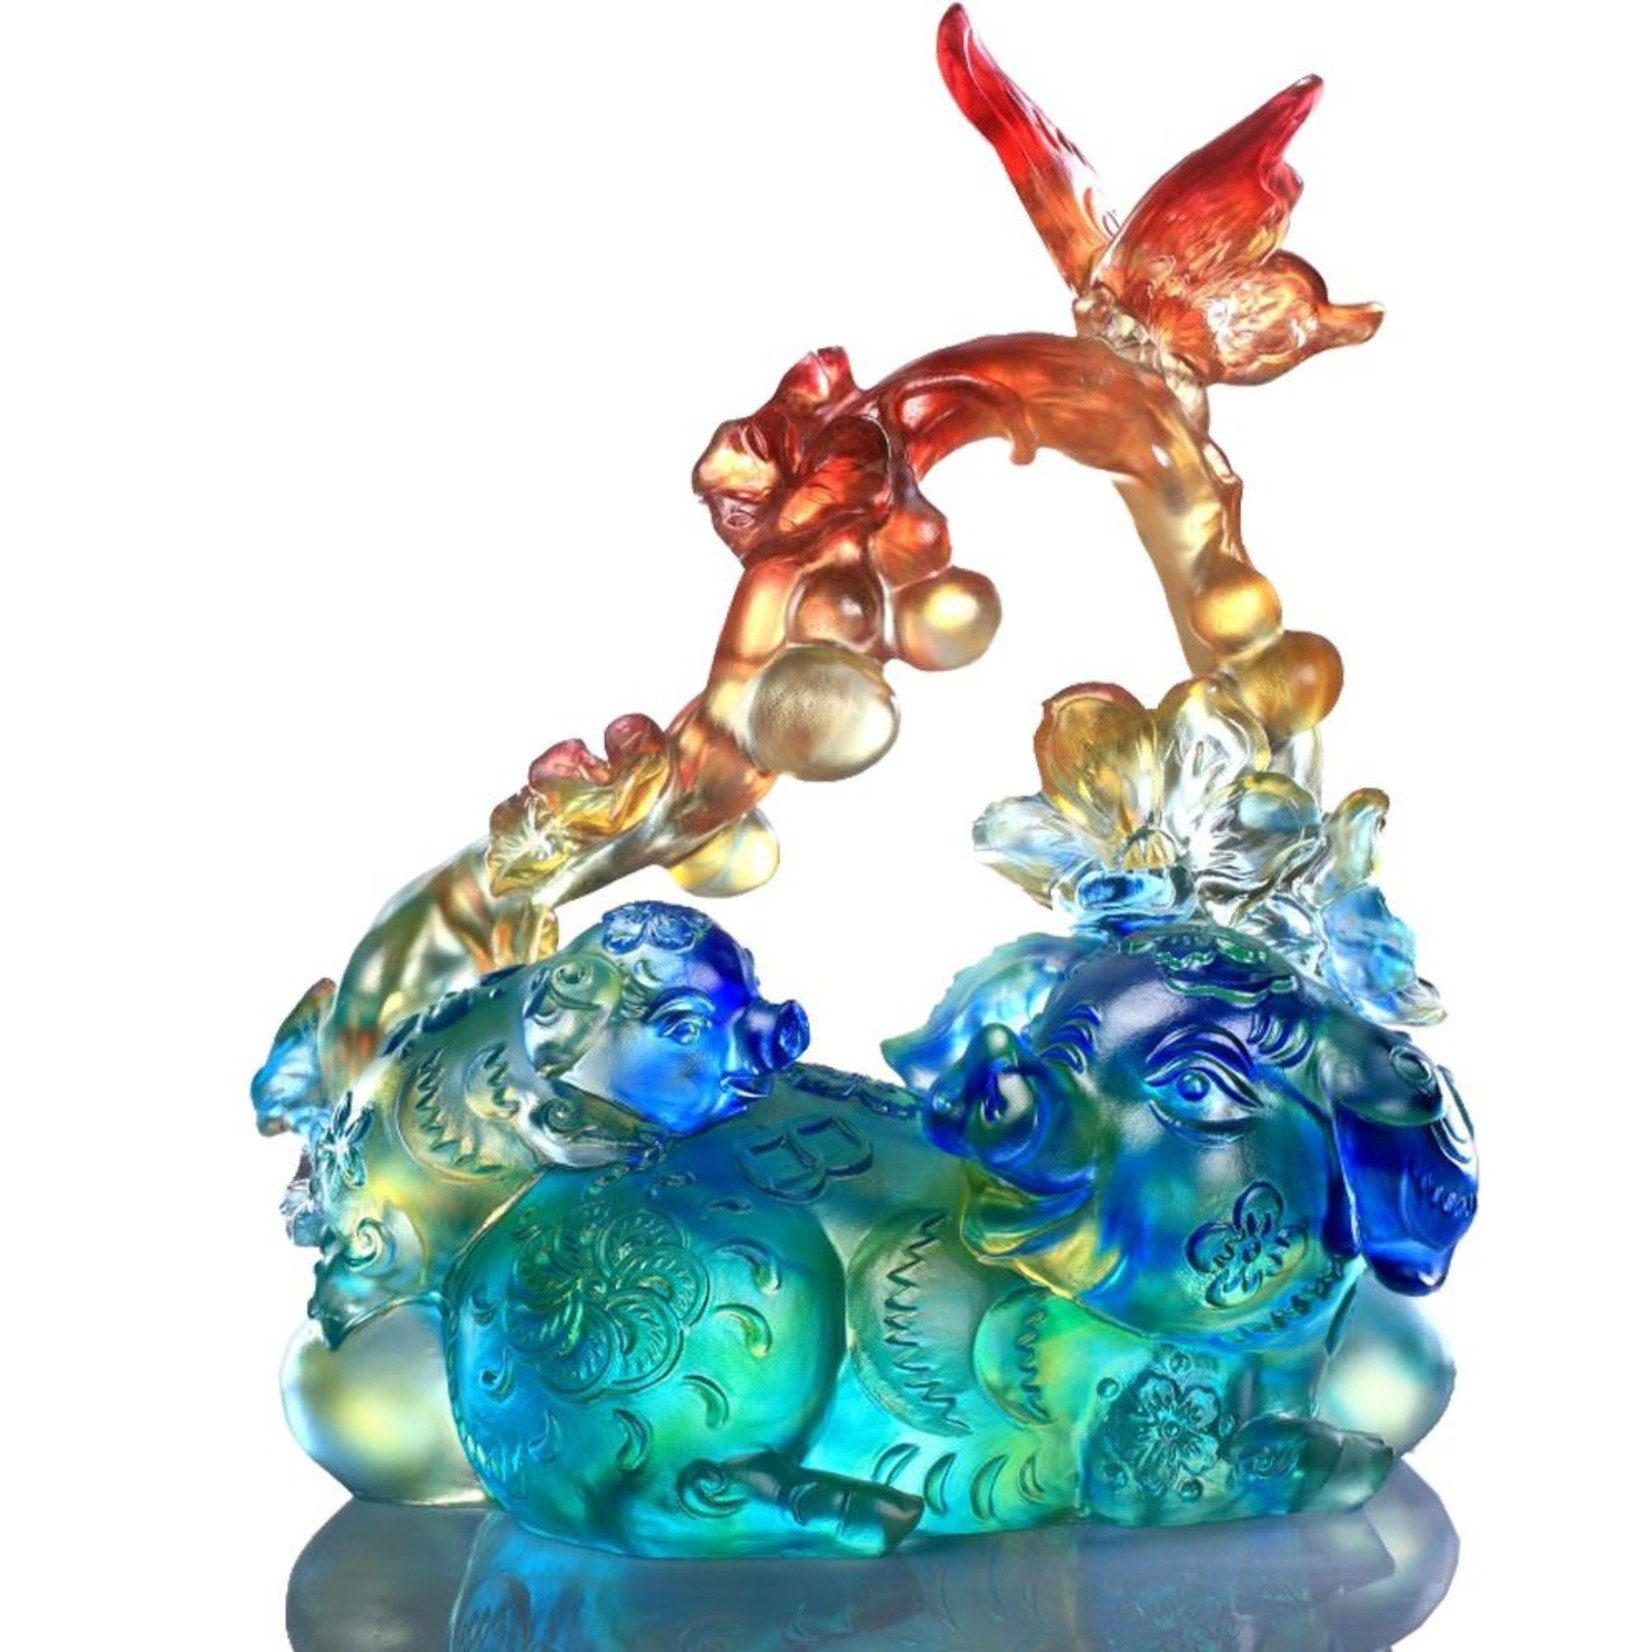 LIULI Crystal Art Crystal Pig and Butterfly, "Fulfillment" Limited Edition, Amber Sky Blue